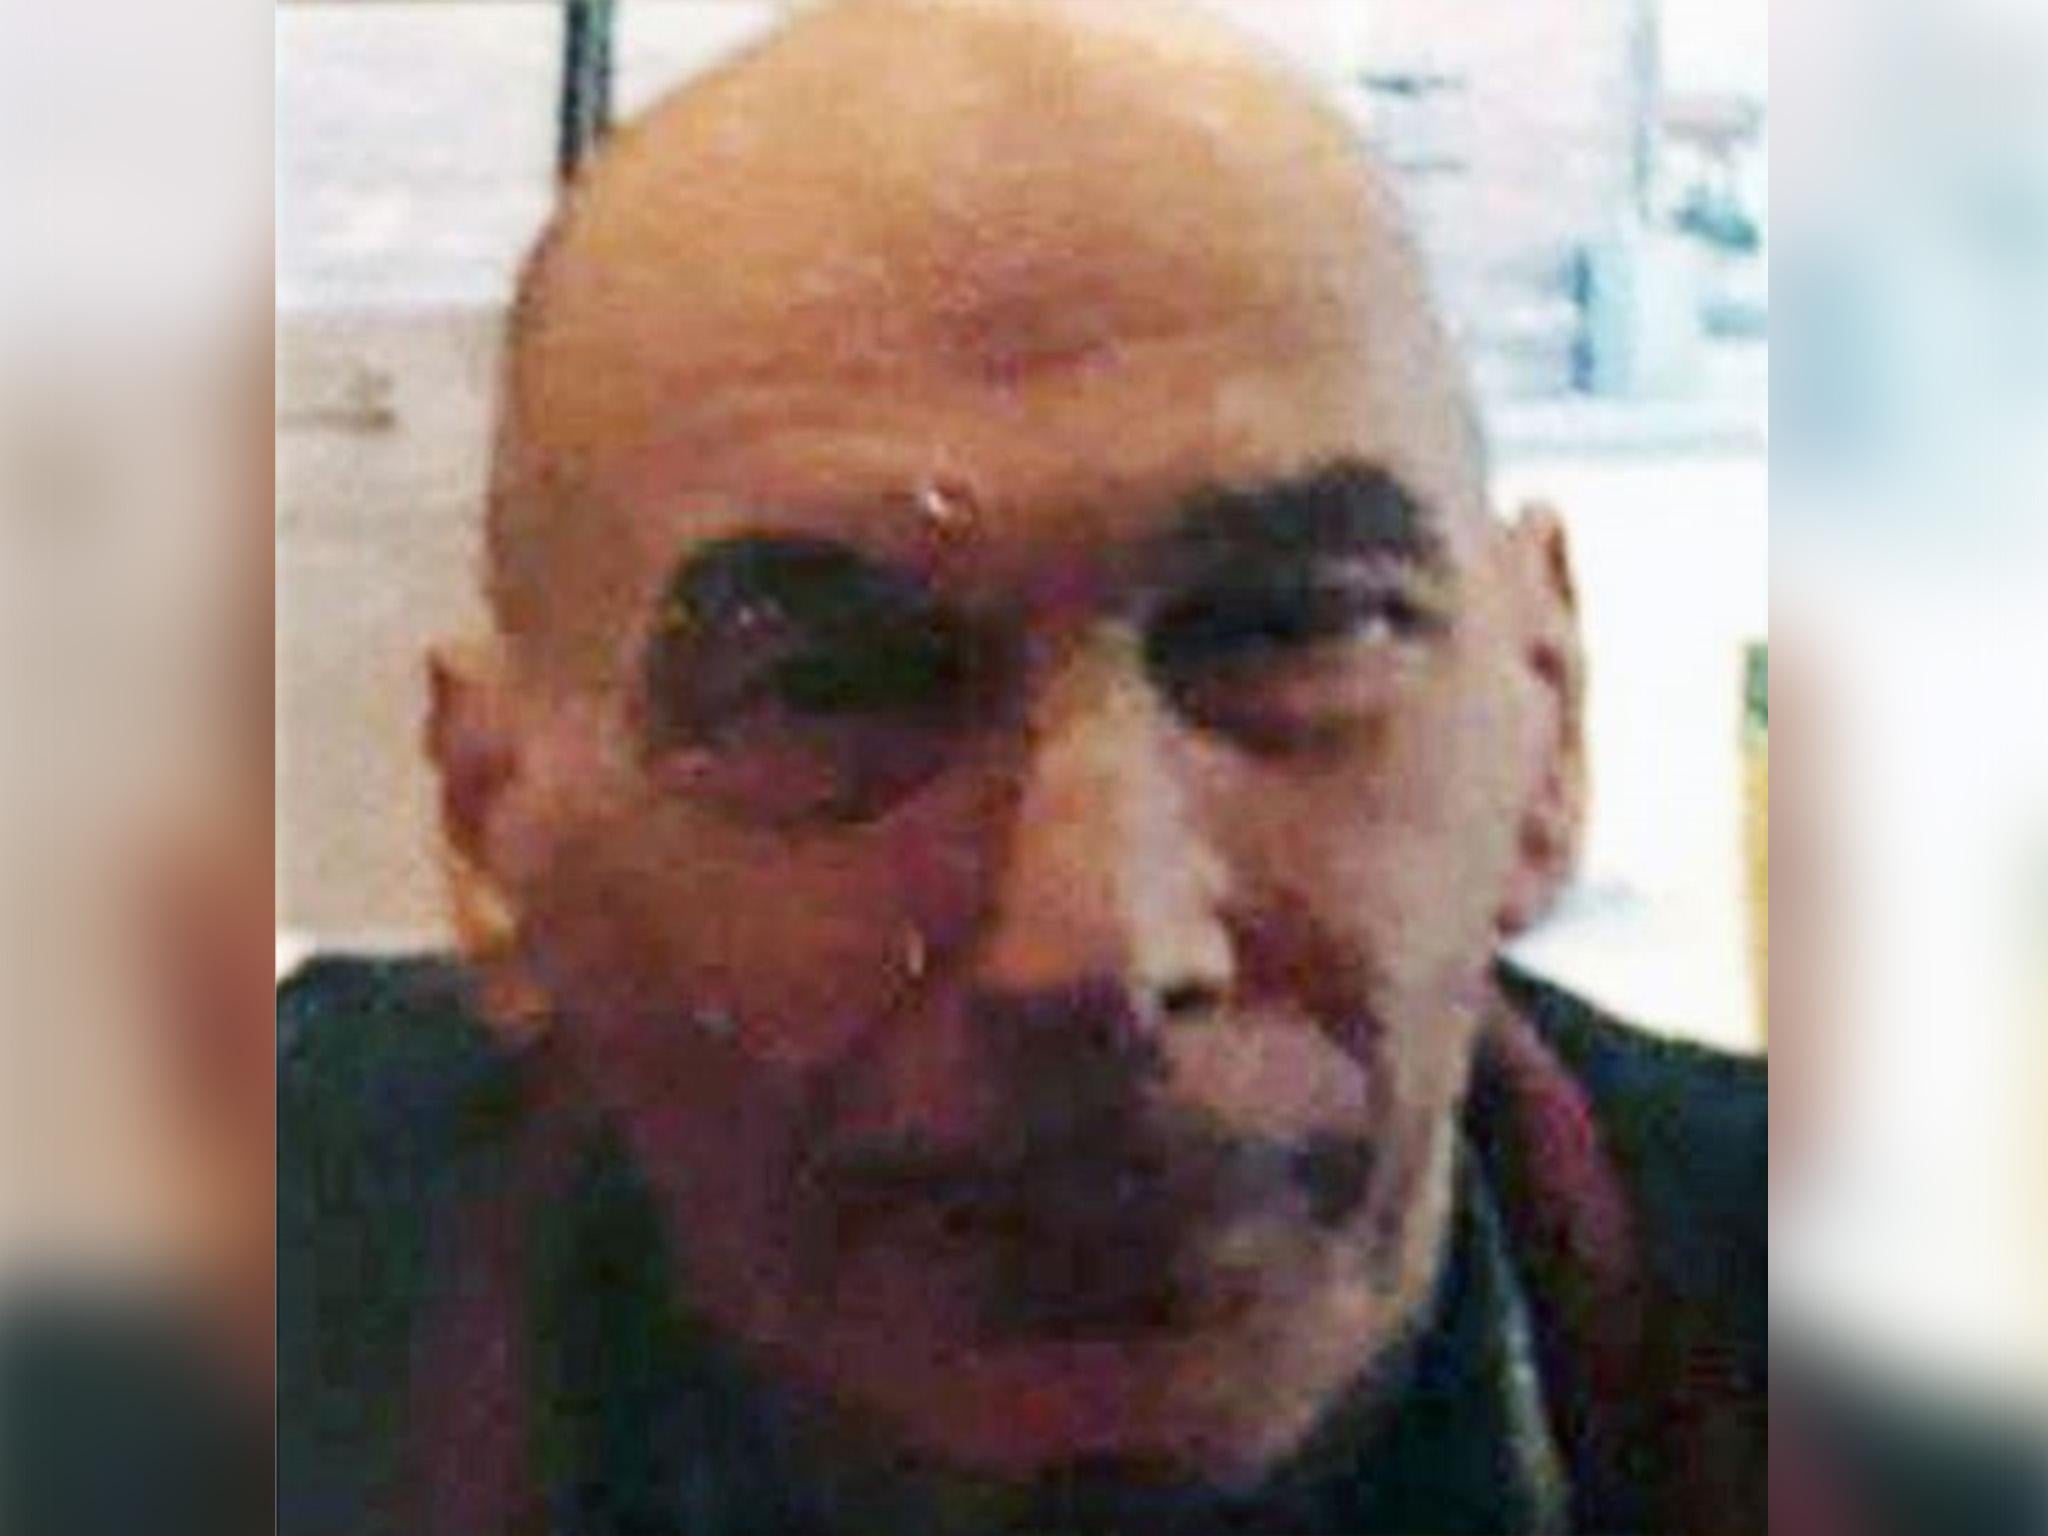 Graham Snell was reported missing on 30 June